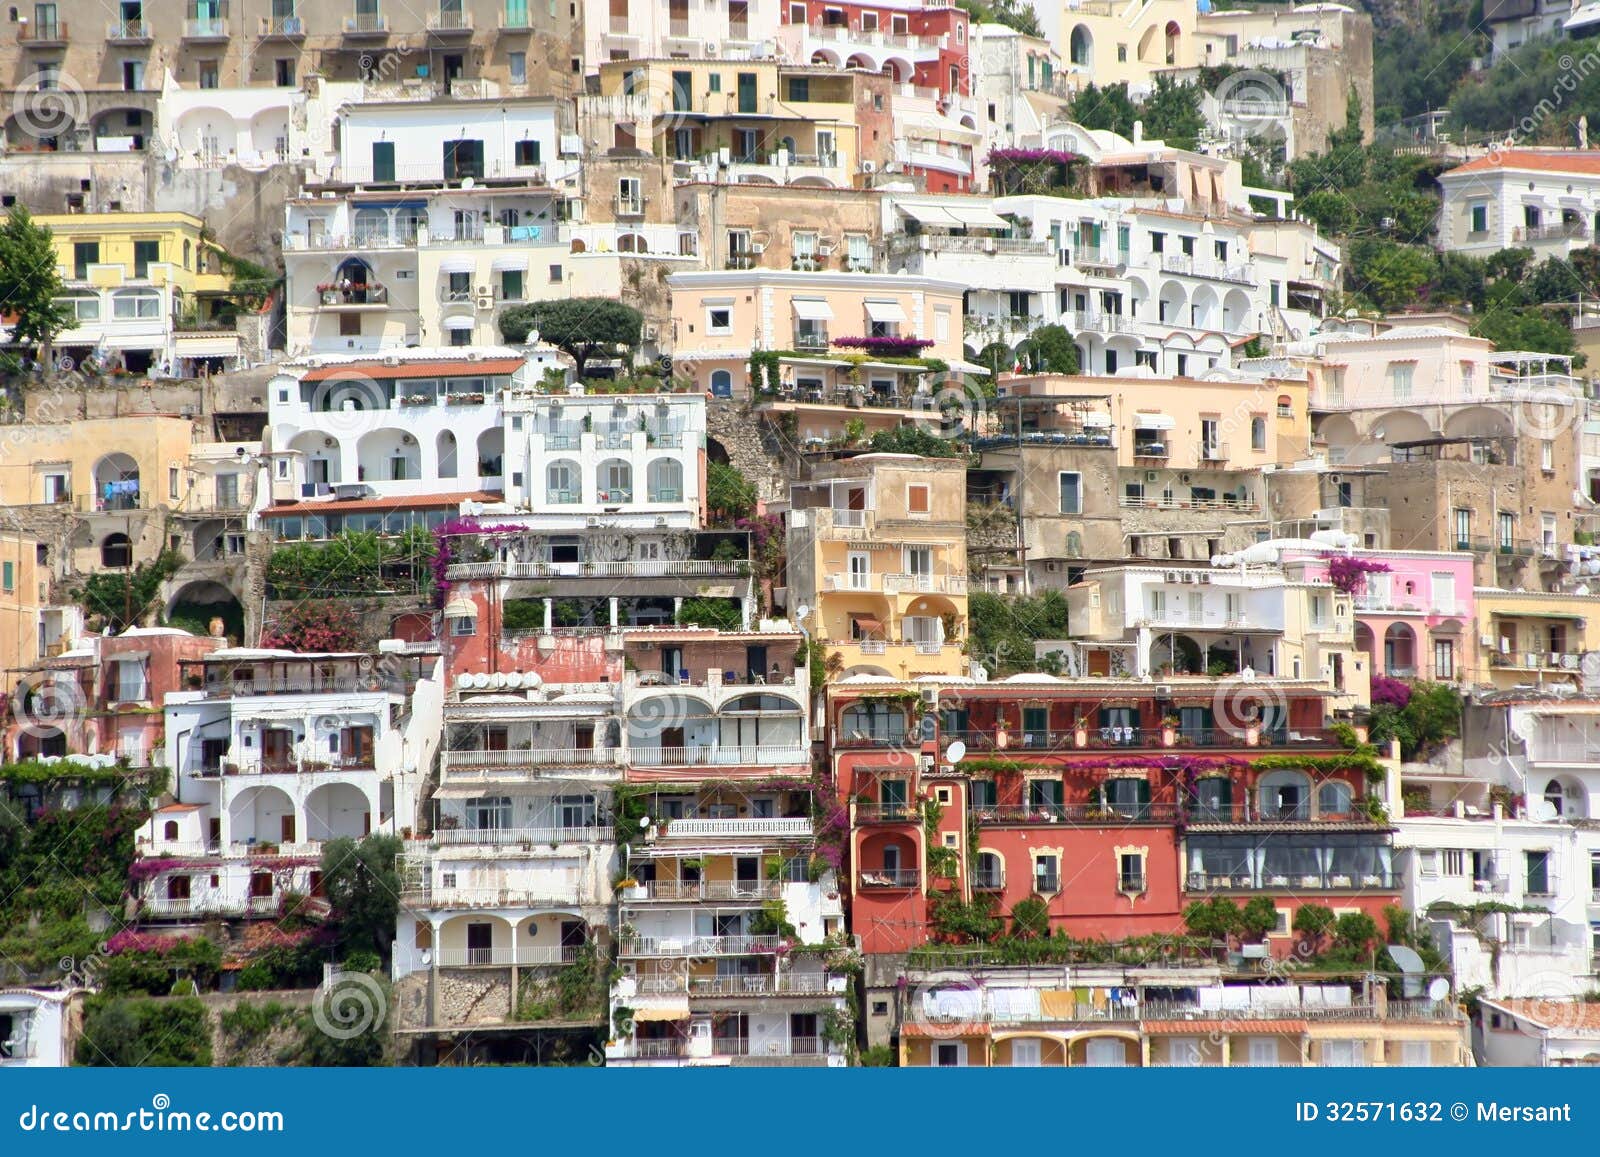 Positano stock photo. Image of travelling, color, colors - 32571632